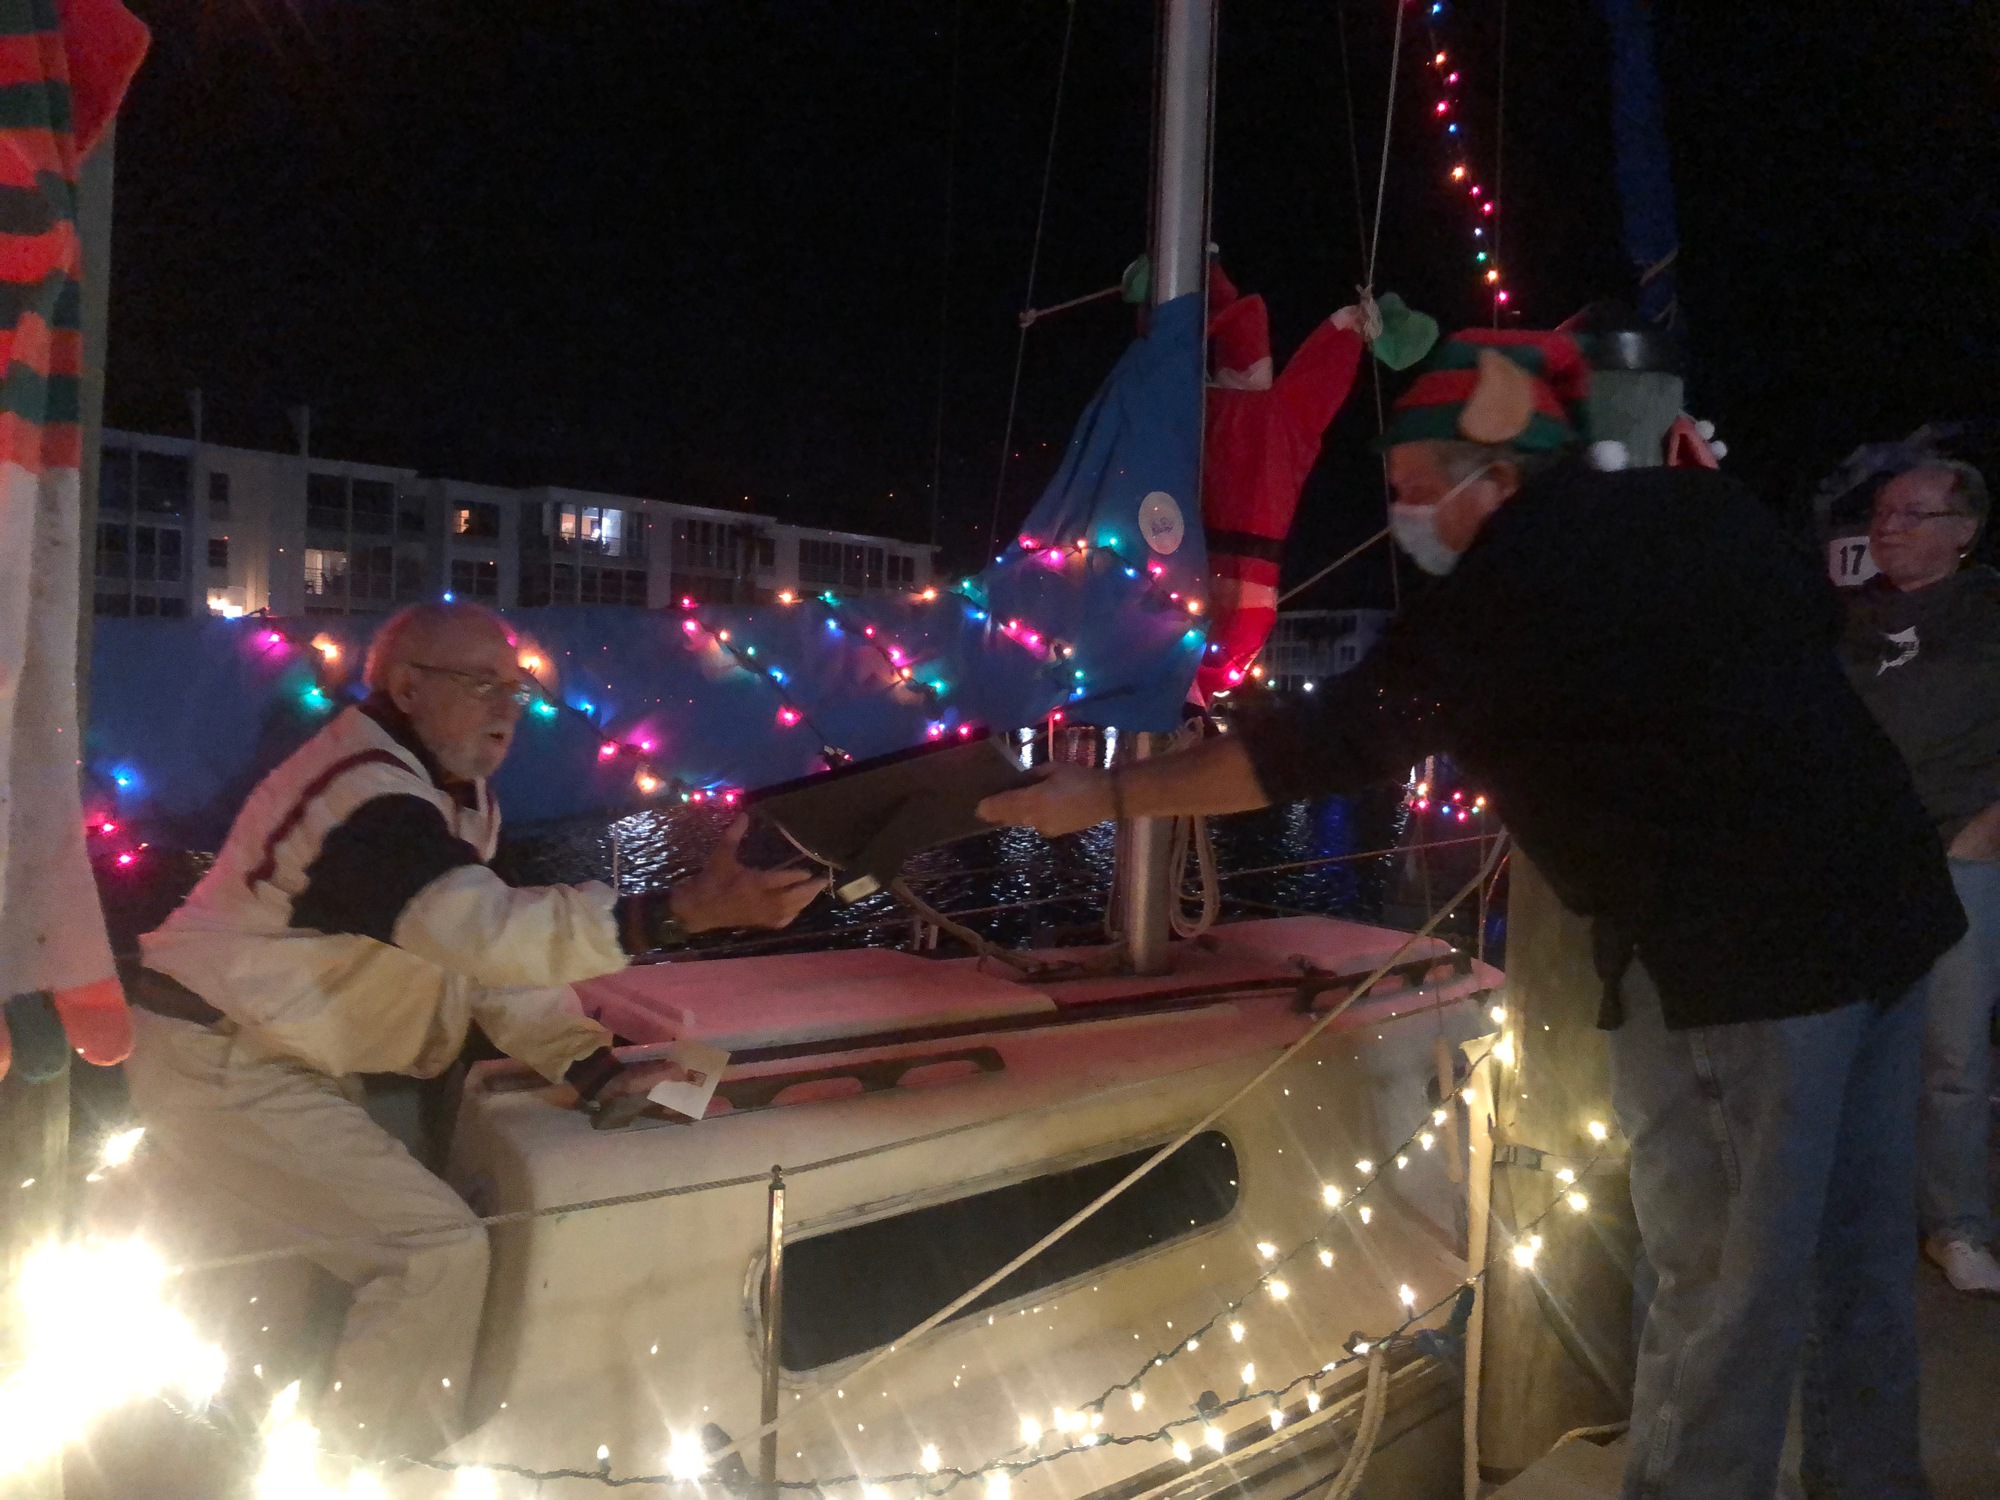 Residents of the Longboat Harbour Condominium complex held a contest to see which dock had the best holiday lights setup.